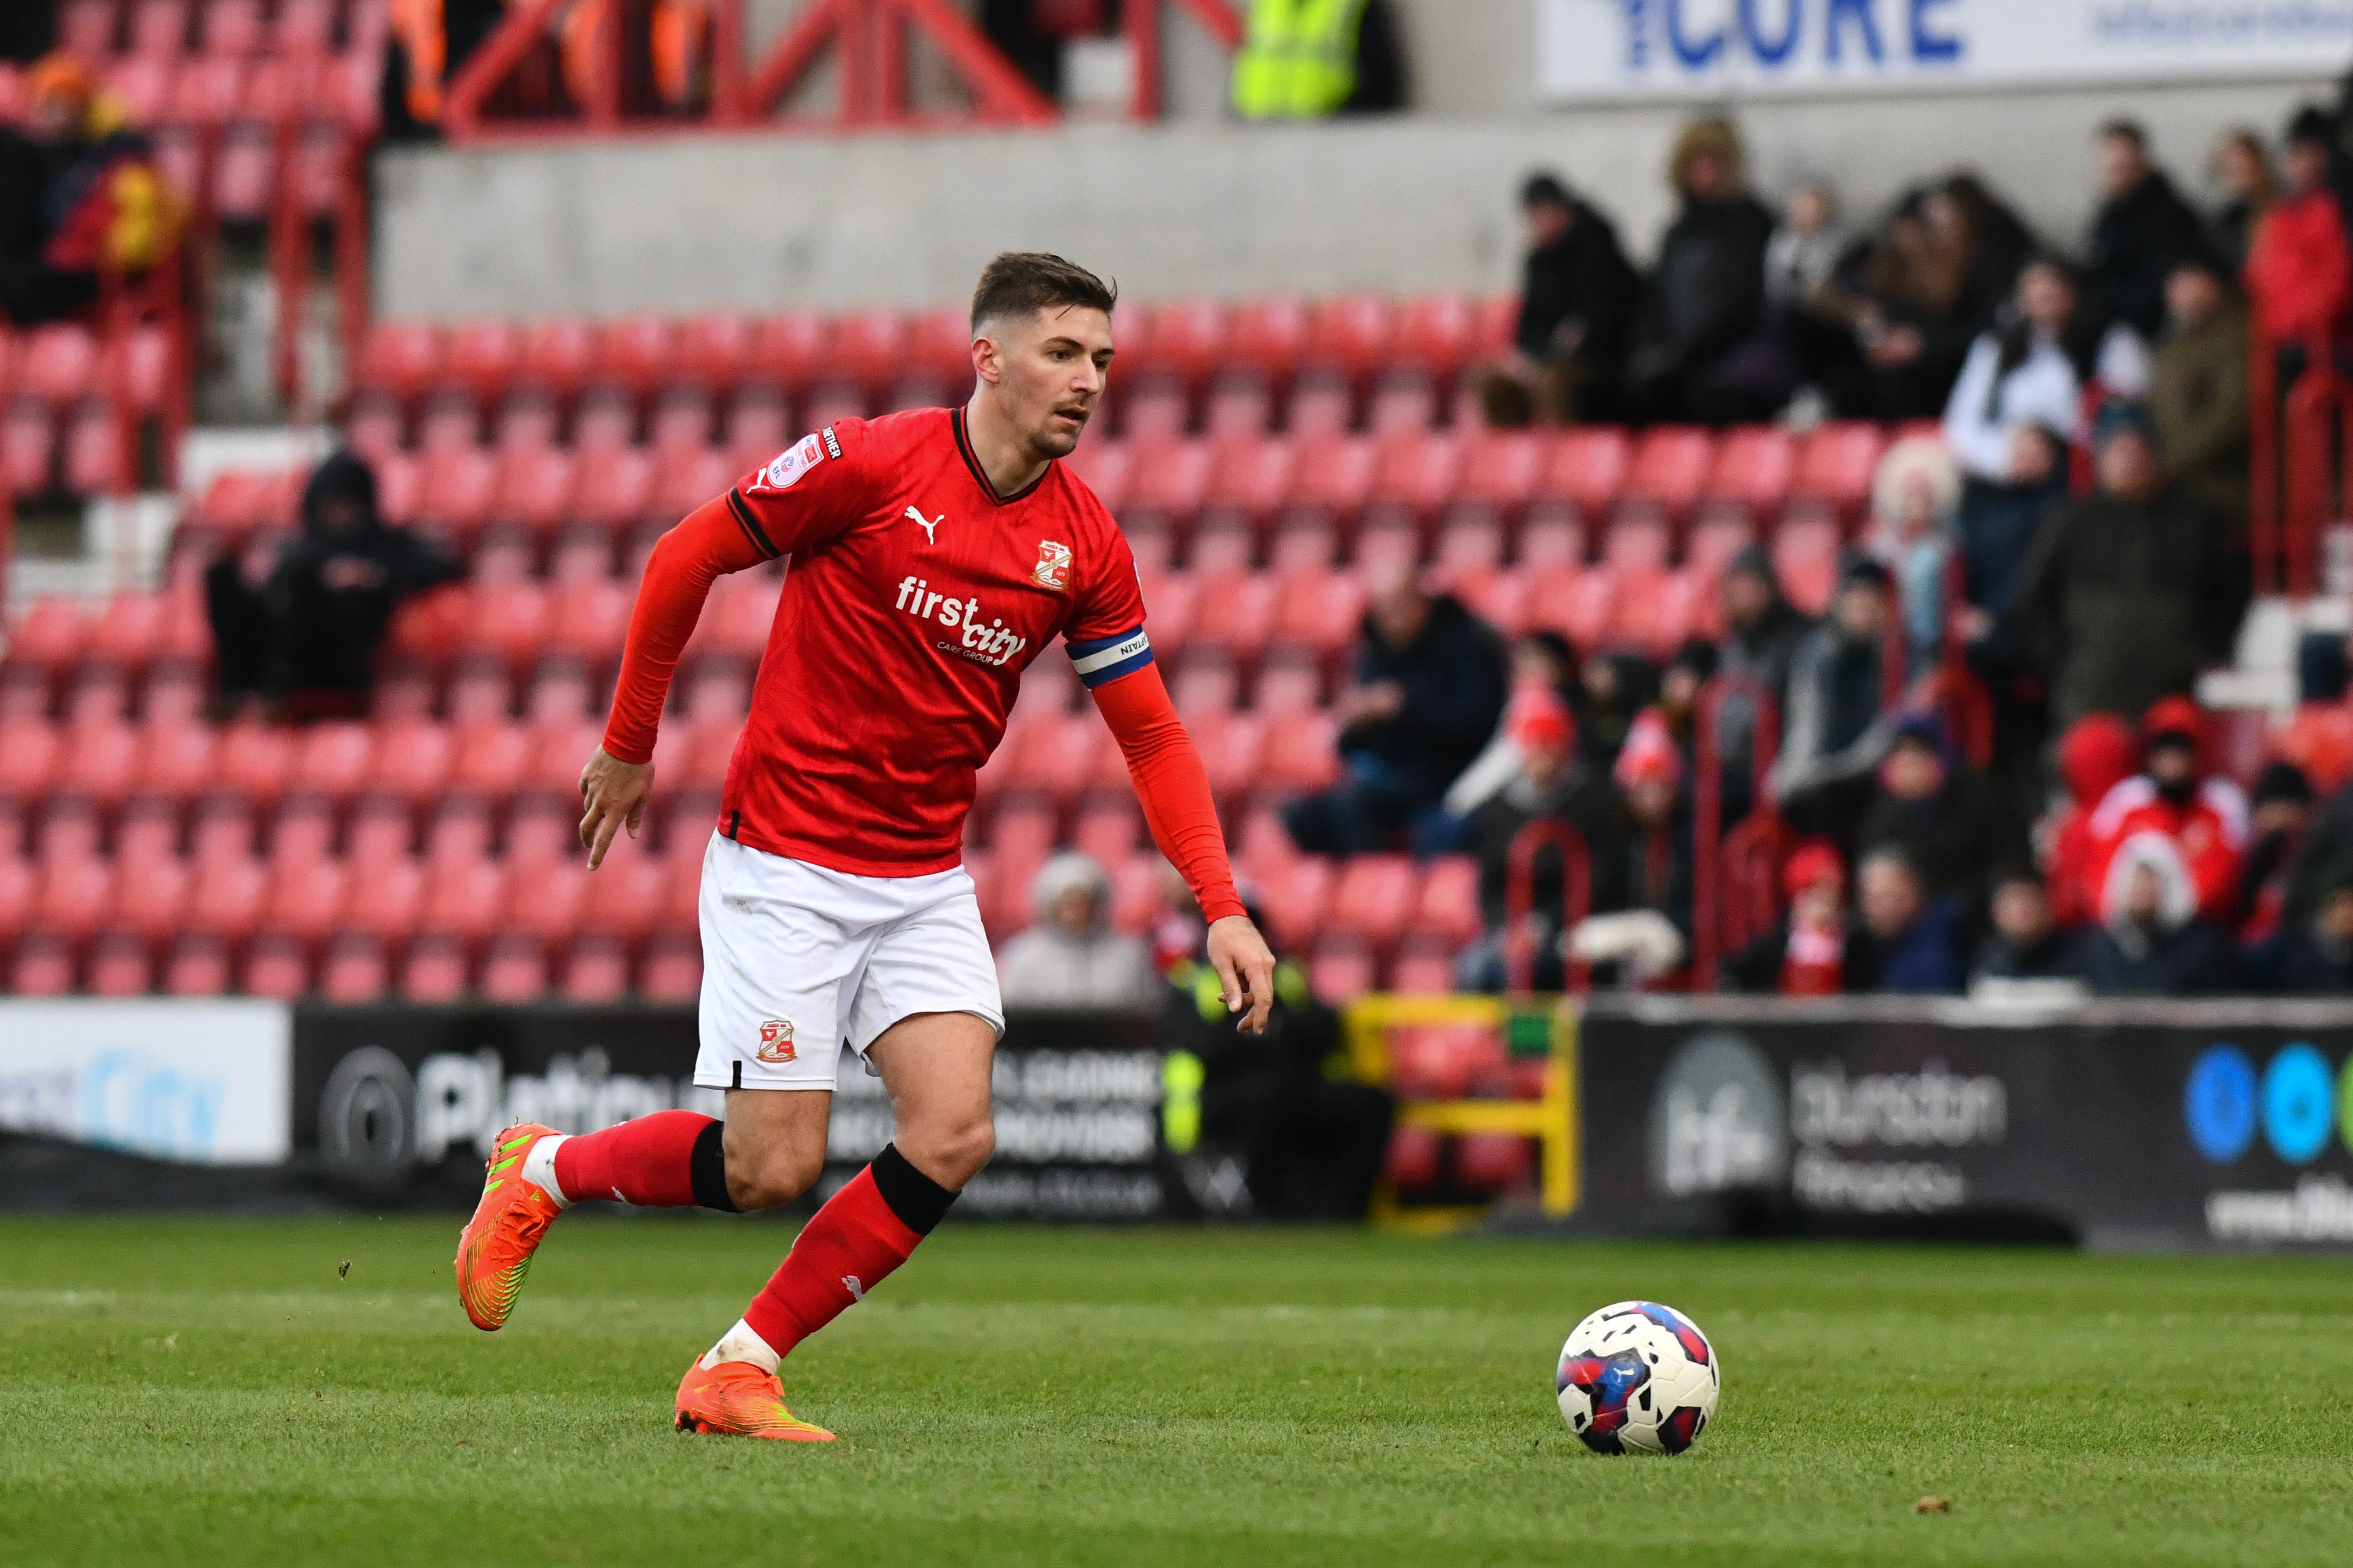 Swindon Town's longest serving player departs to join Colchester United